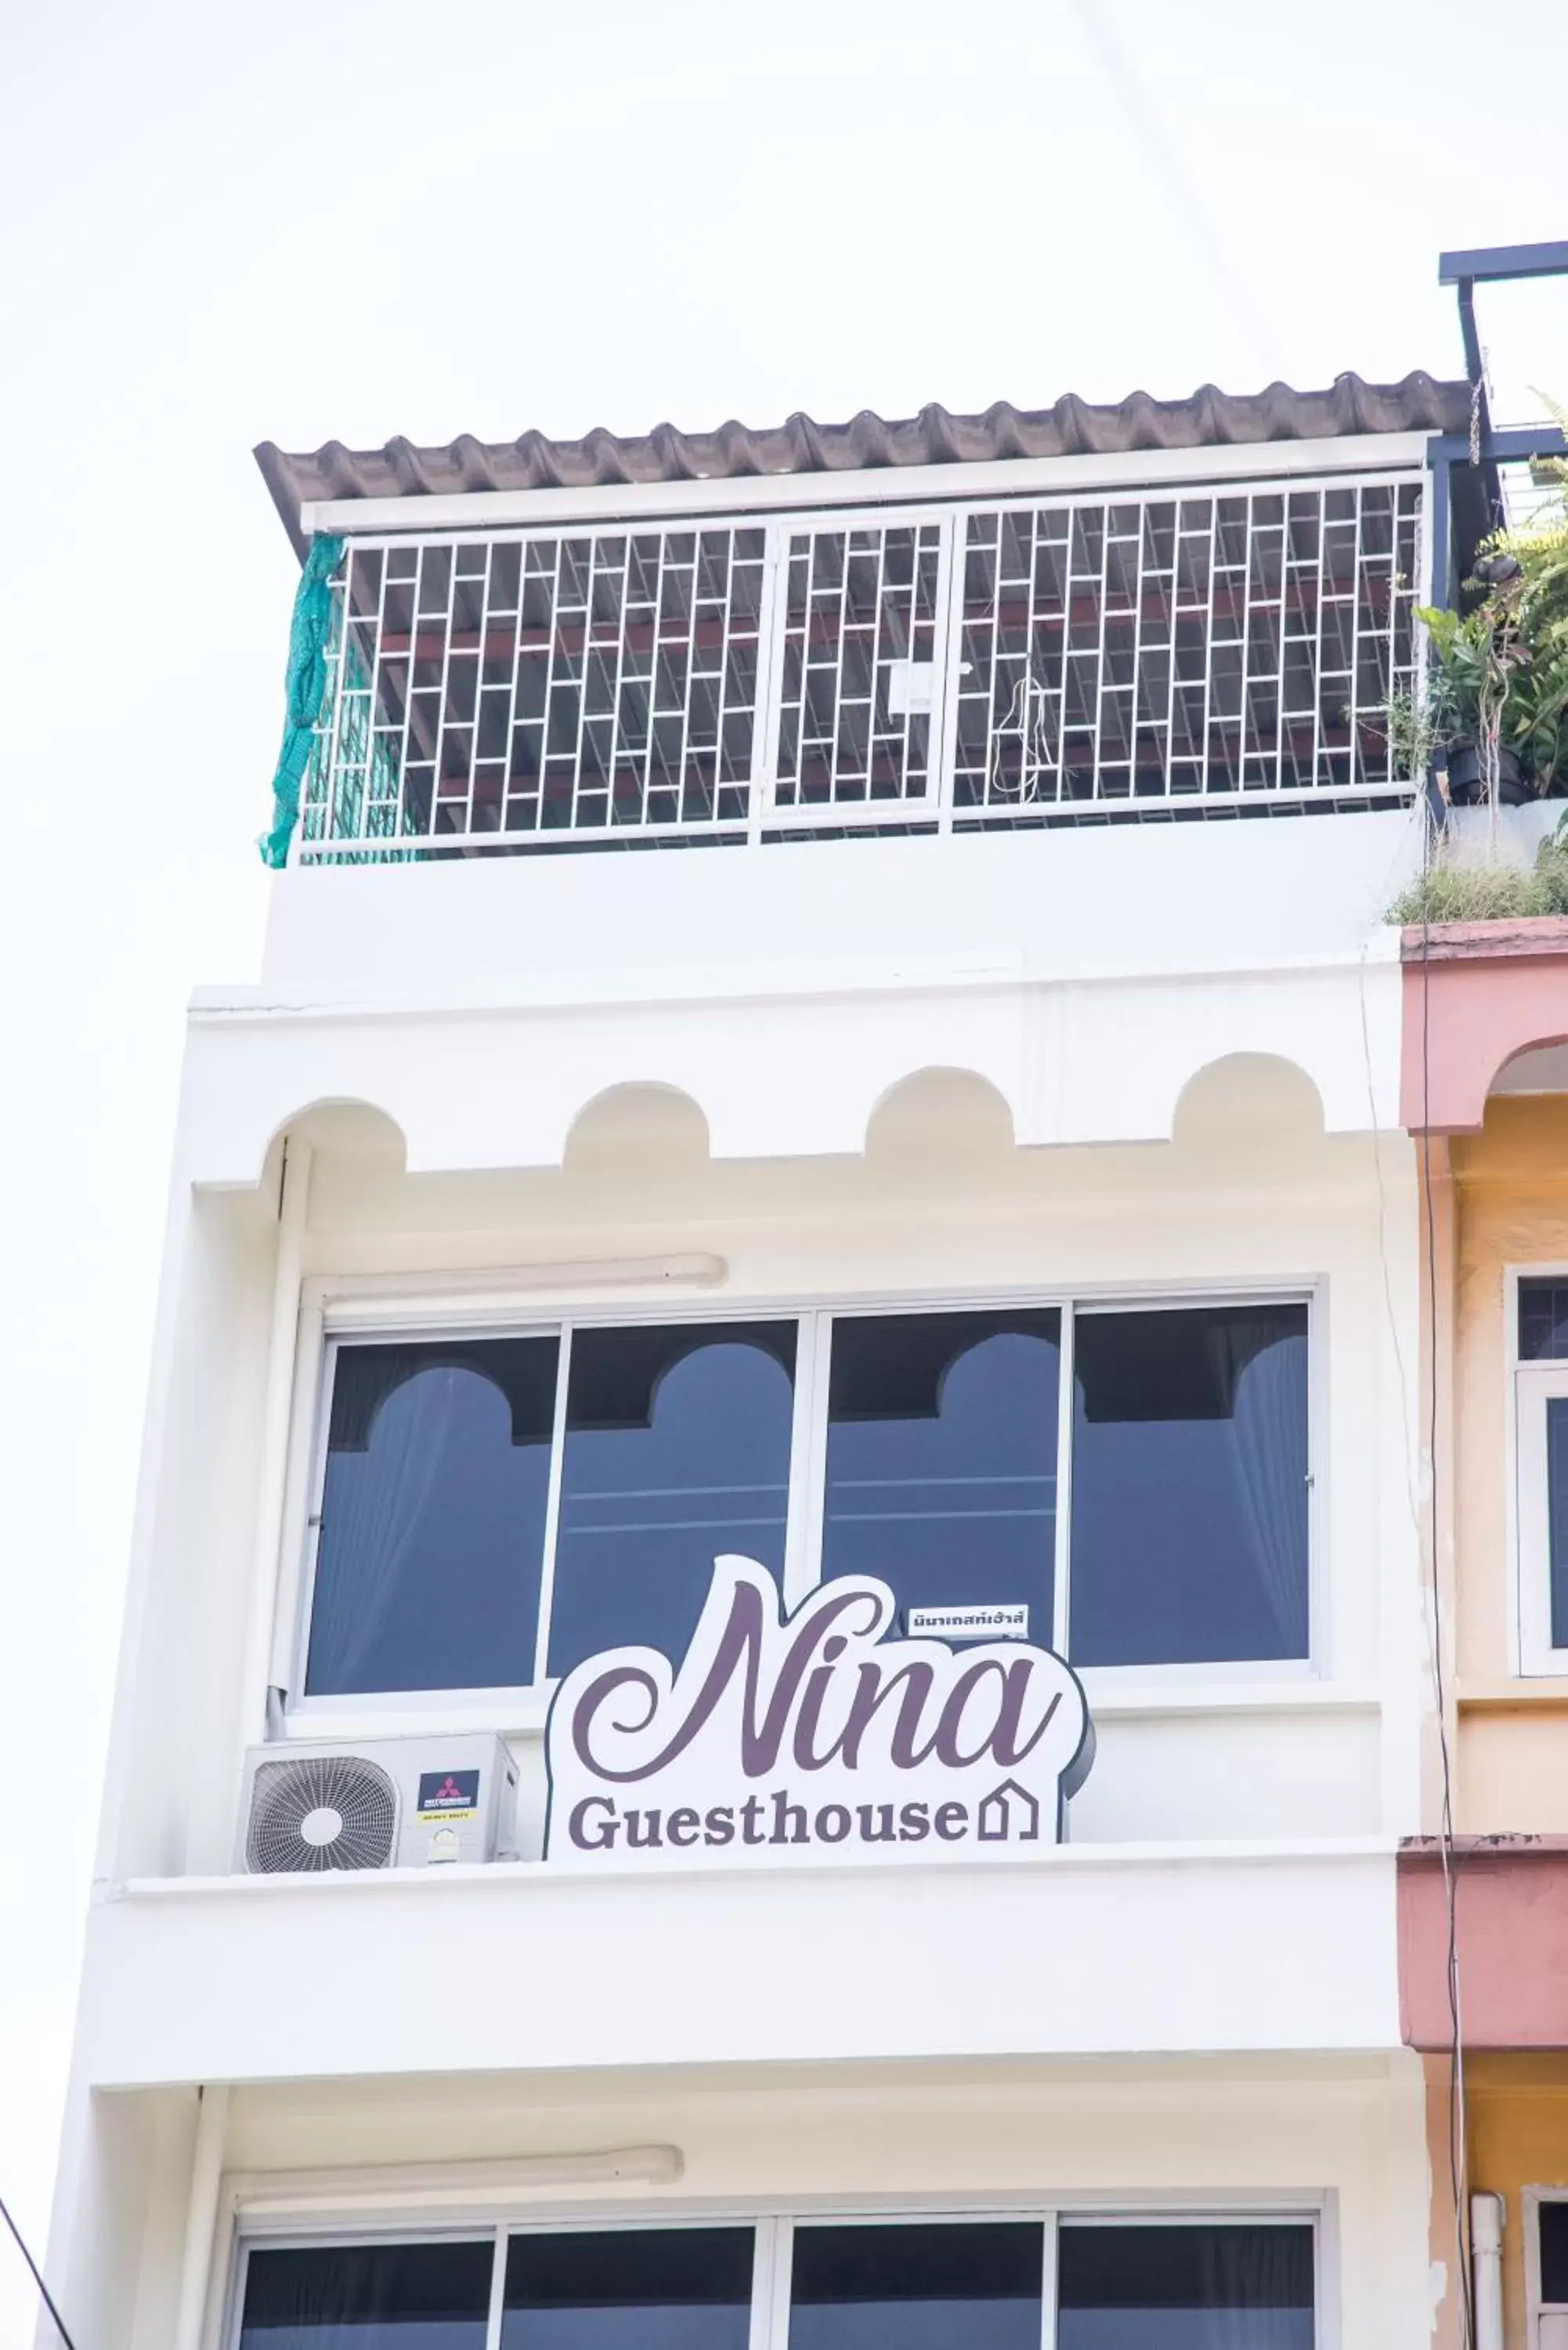 Property Building in ninaguesthouse